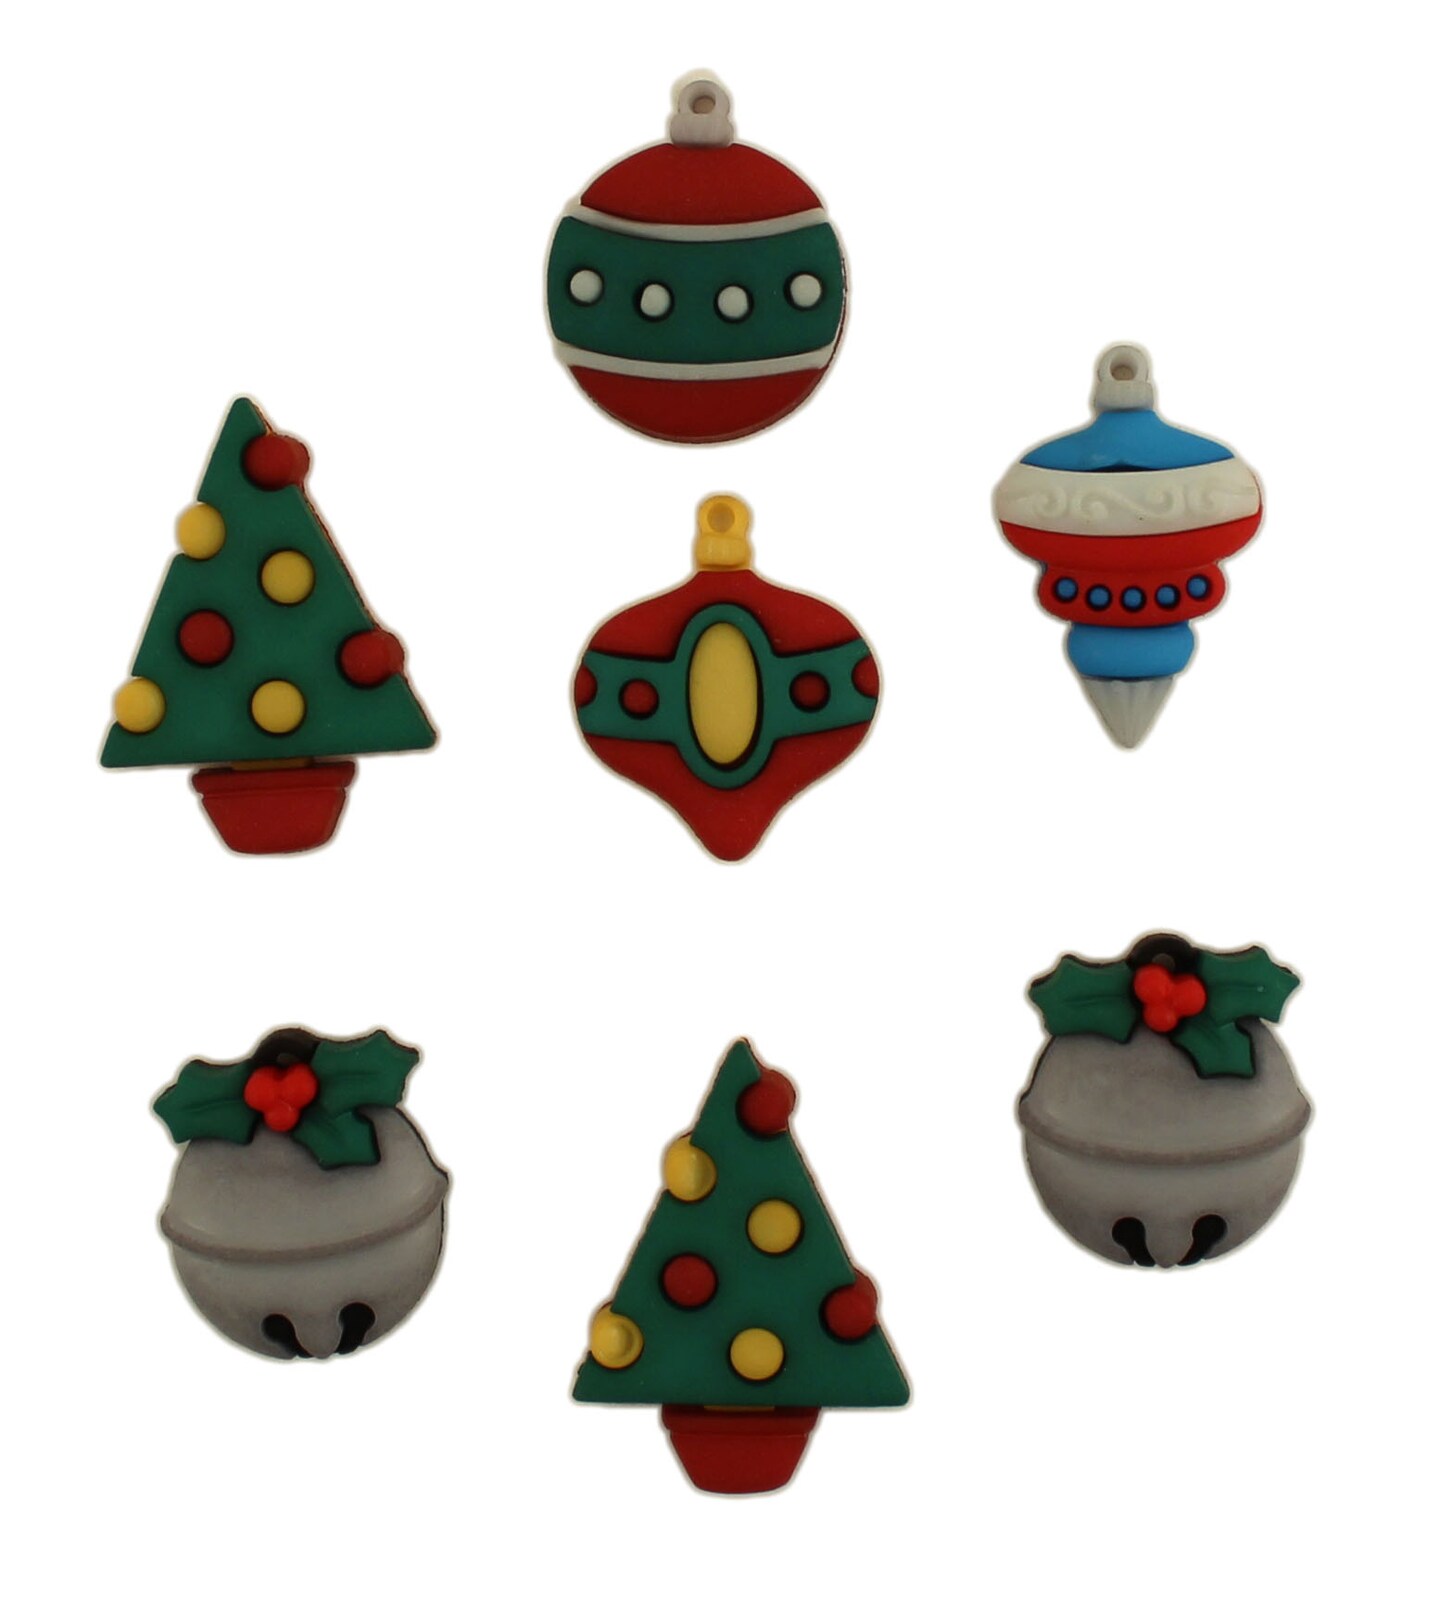 Buttons Galore 50+ Assorted Christmas Buttons for Sewing & Crafts - Set of  6 Button Packs - Candy Canes, Santa, Lights & More